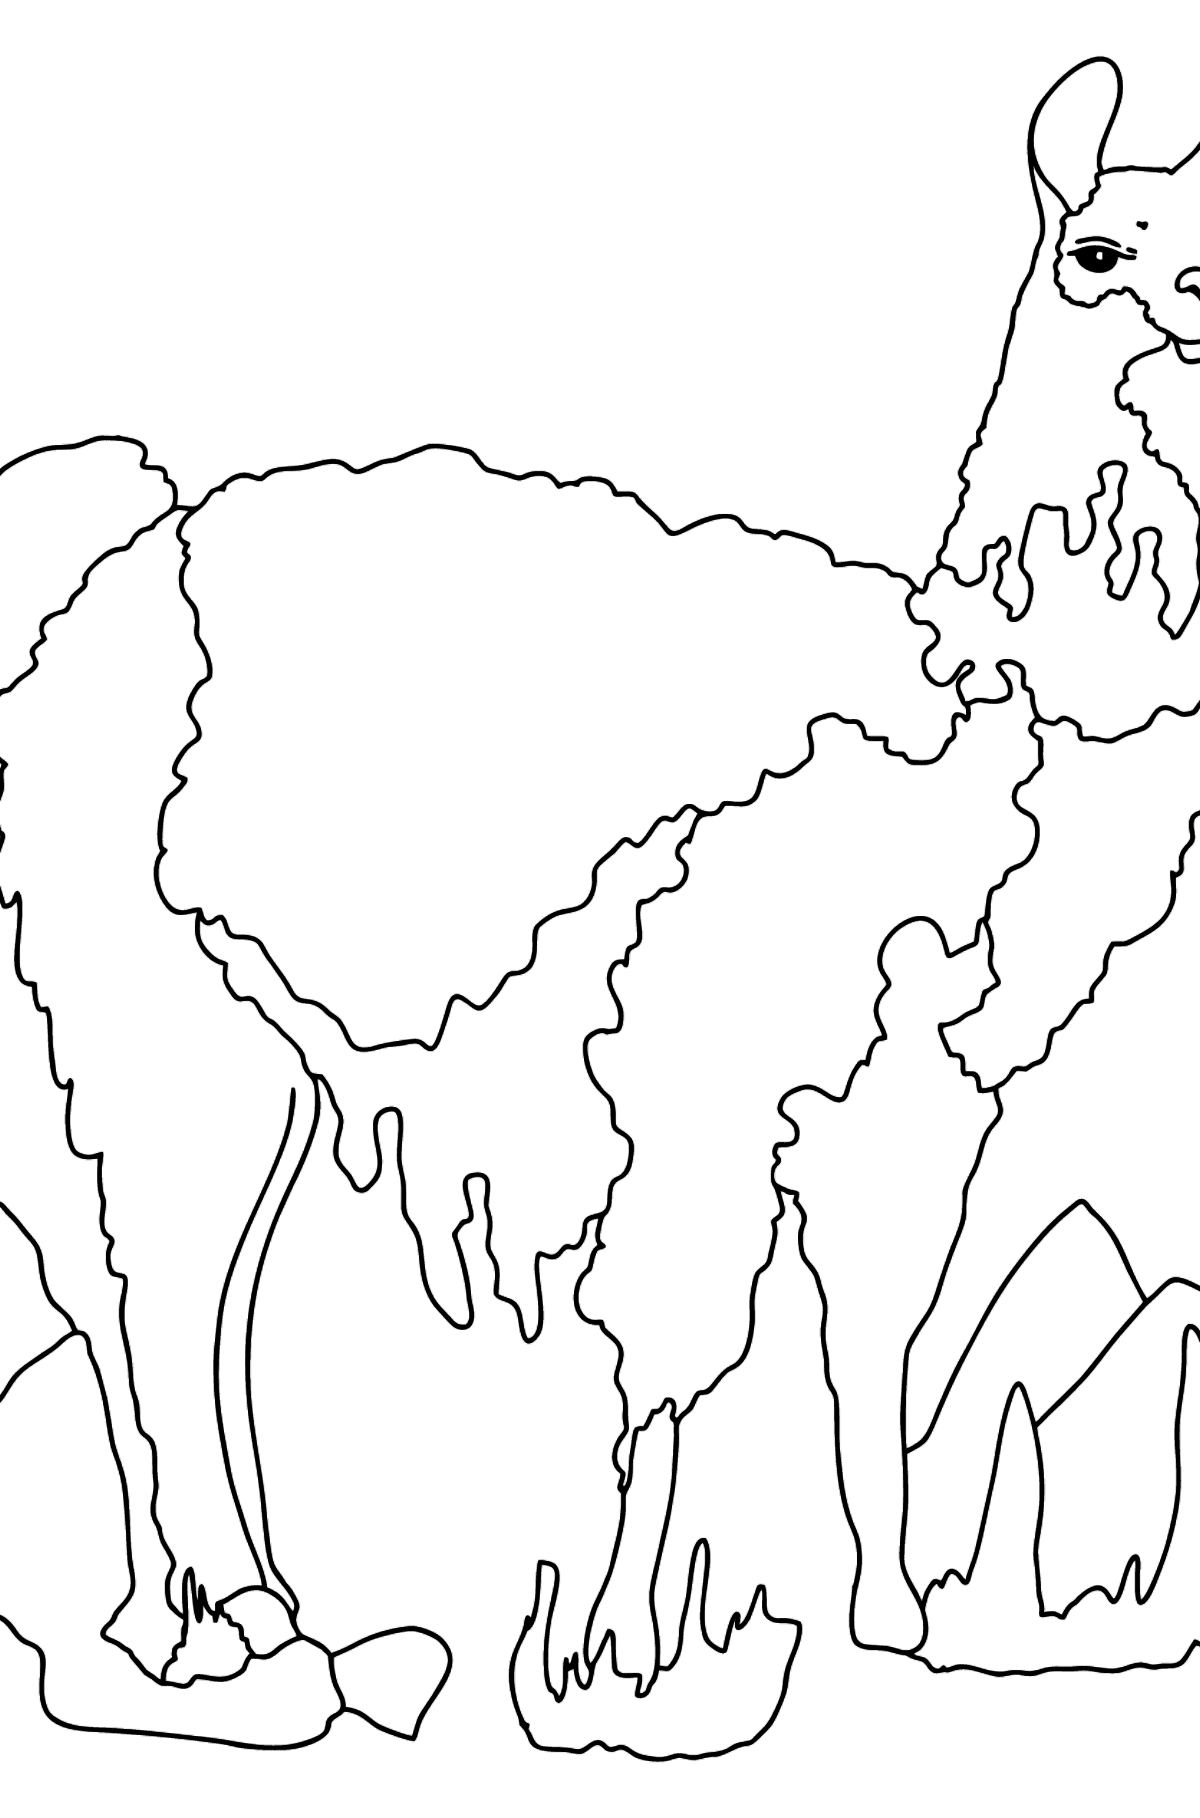 Coloring Page - A Lama is Looking Haughtily - Coloring Pages for Kids